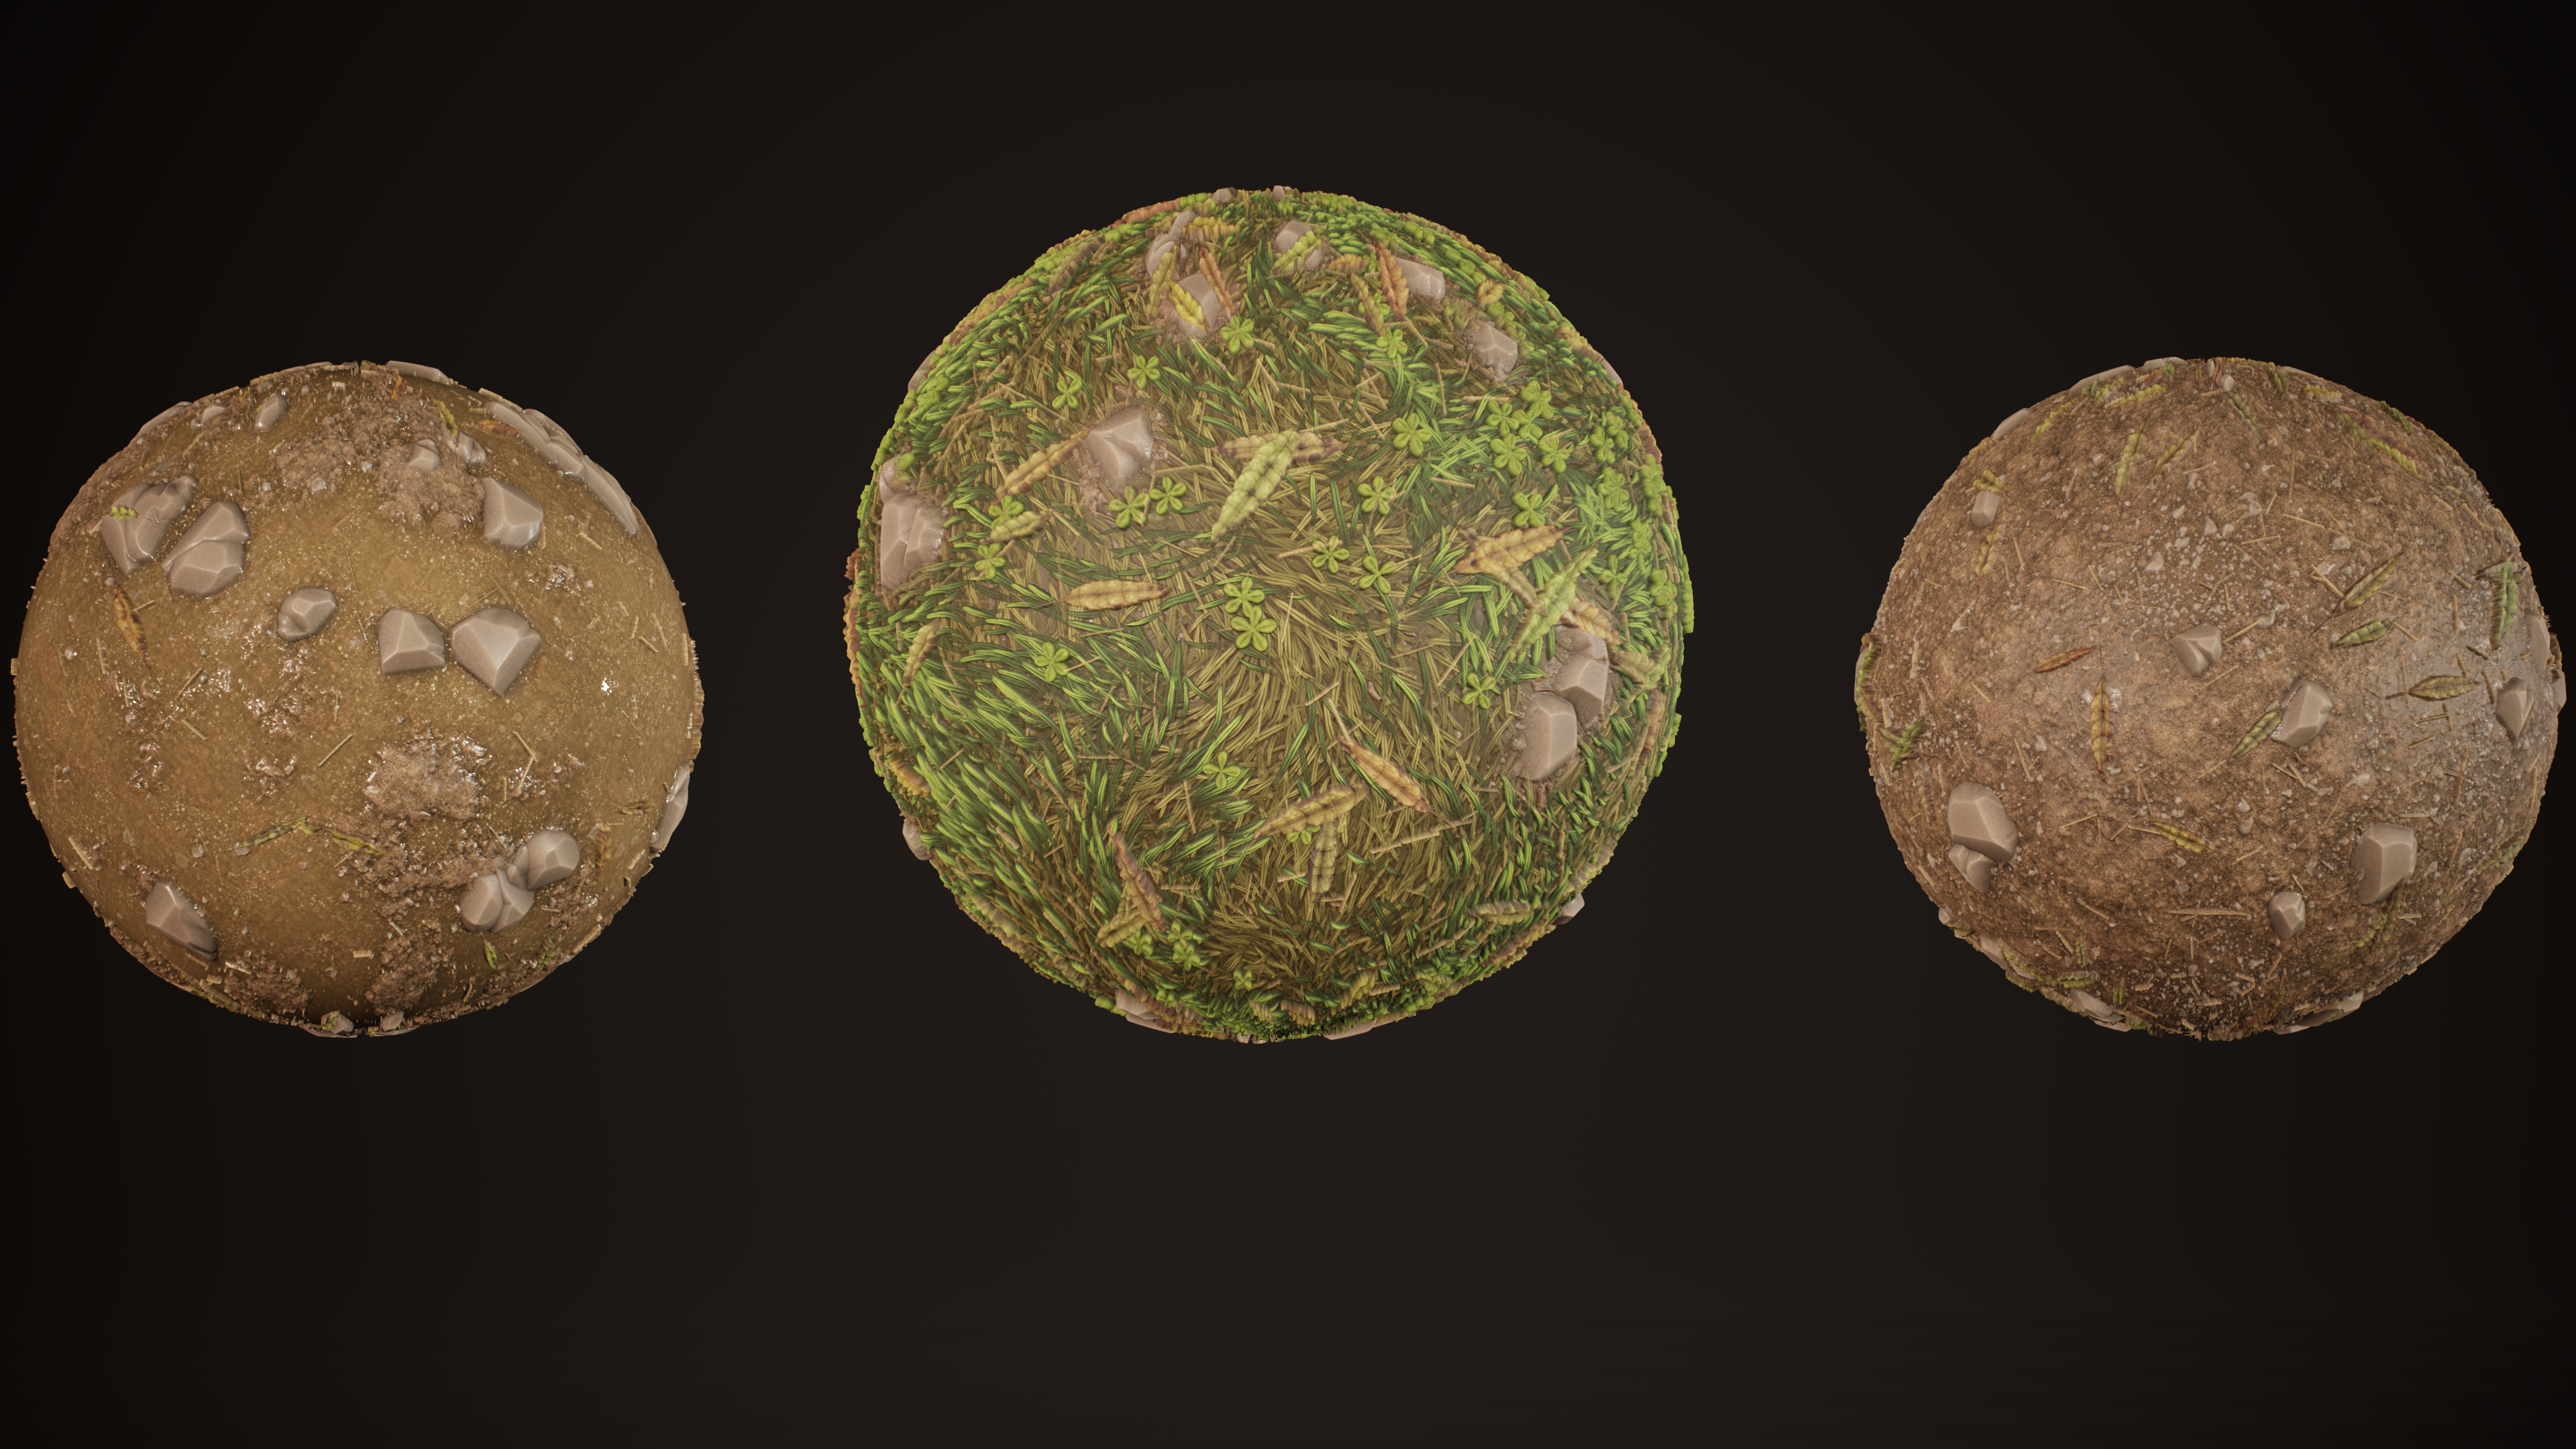 Ground material made in Substance Designer.